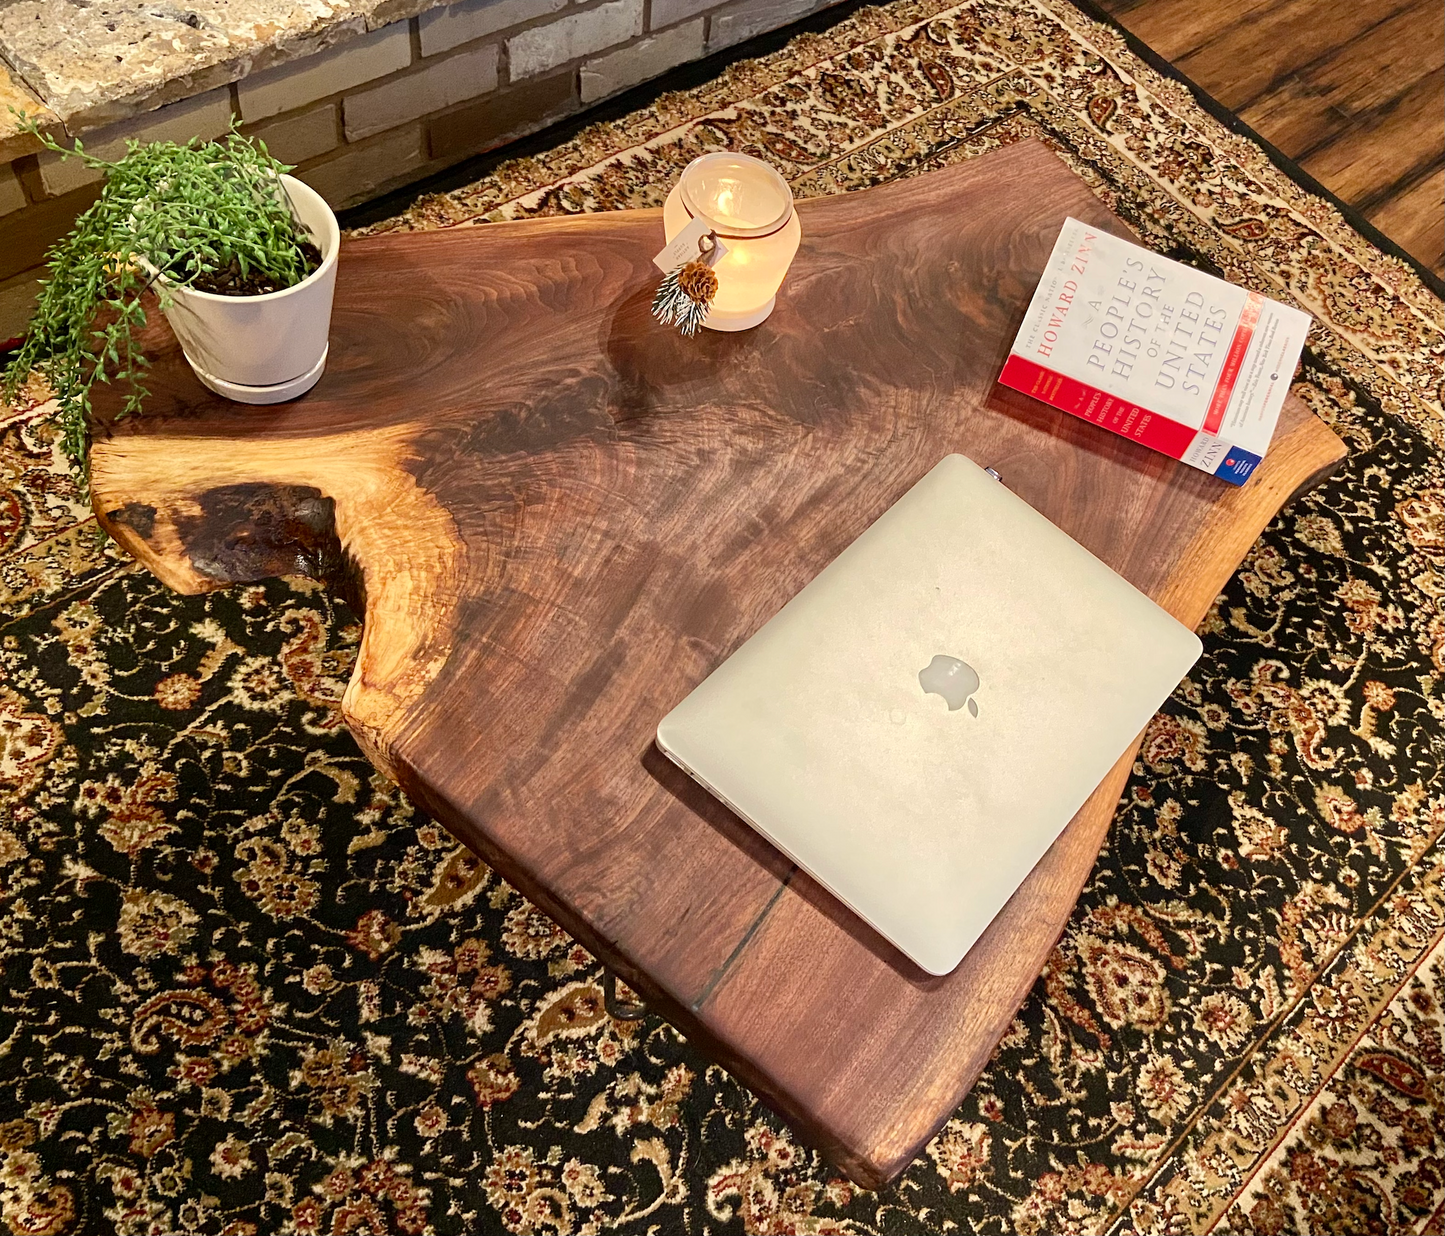 Wide Forked Live Edge Walnut Table|Stunning Live Edge Wood Coffee Table|Natural Edge Black Walnut Table|Live Edge Wood Rustic Walnut Table